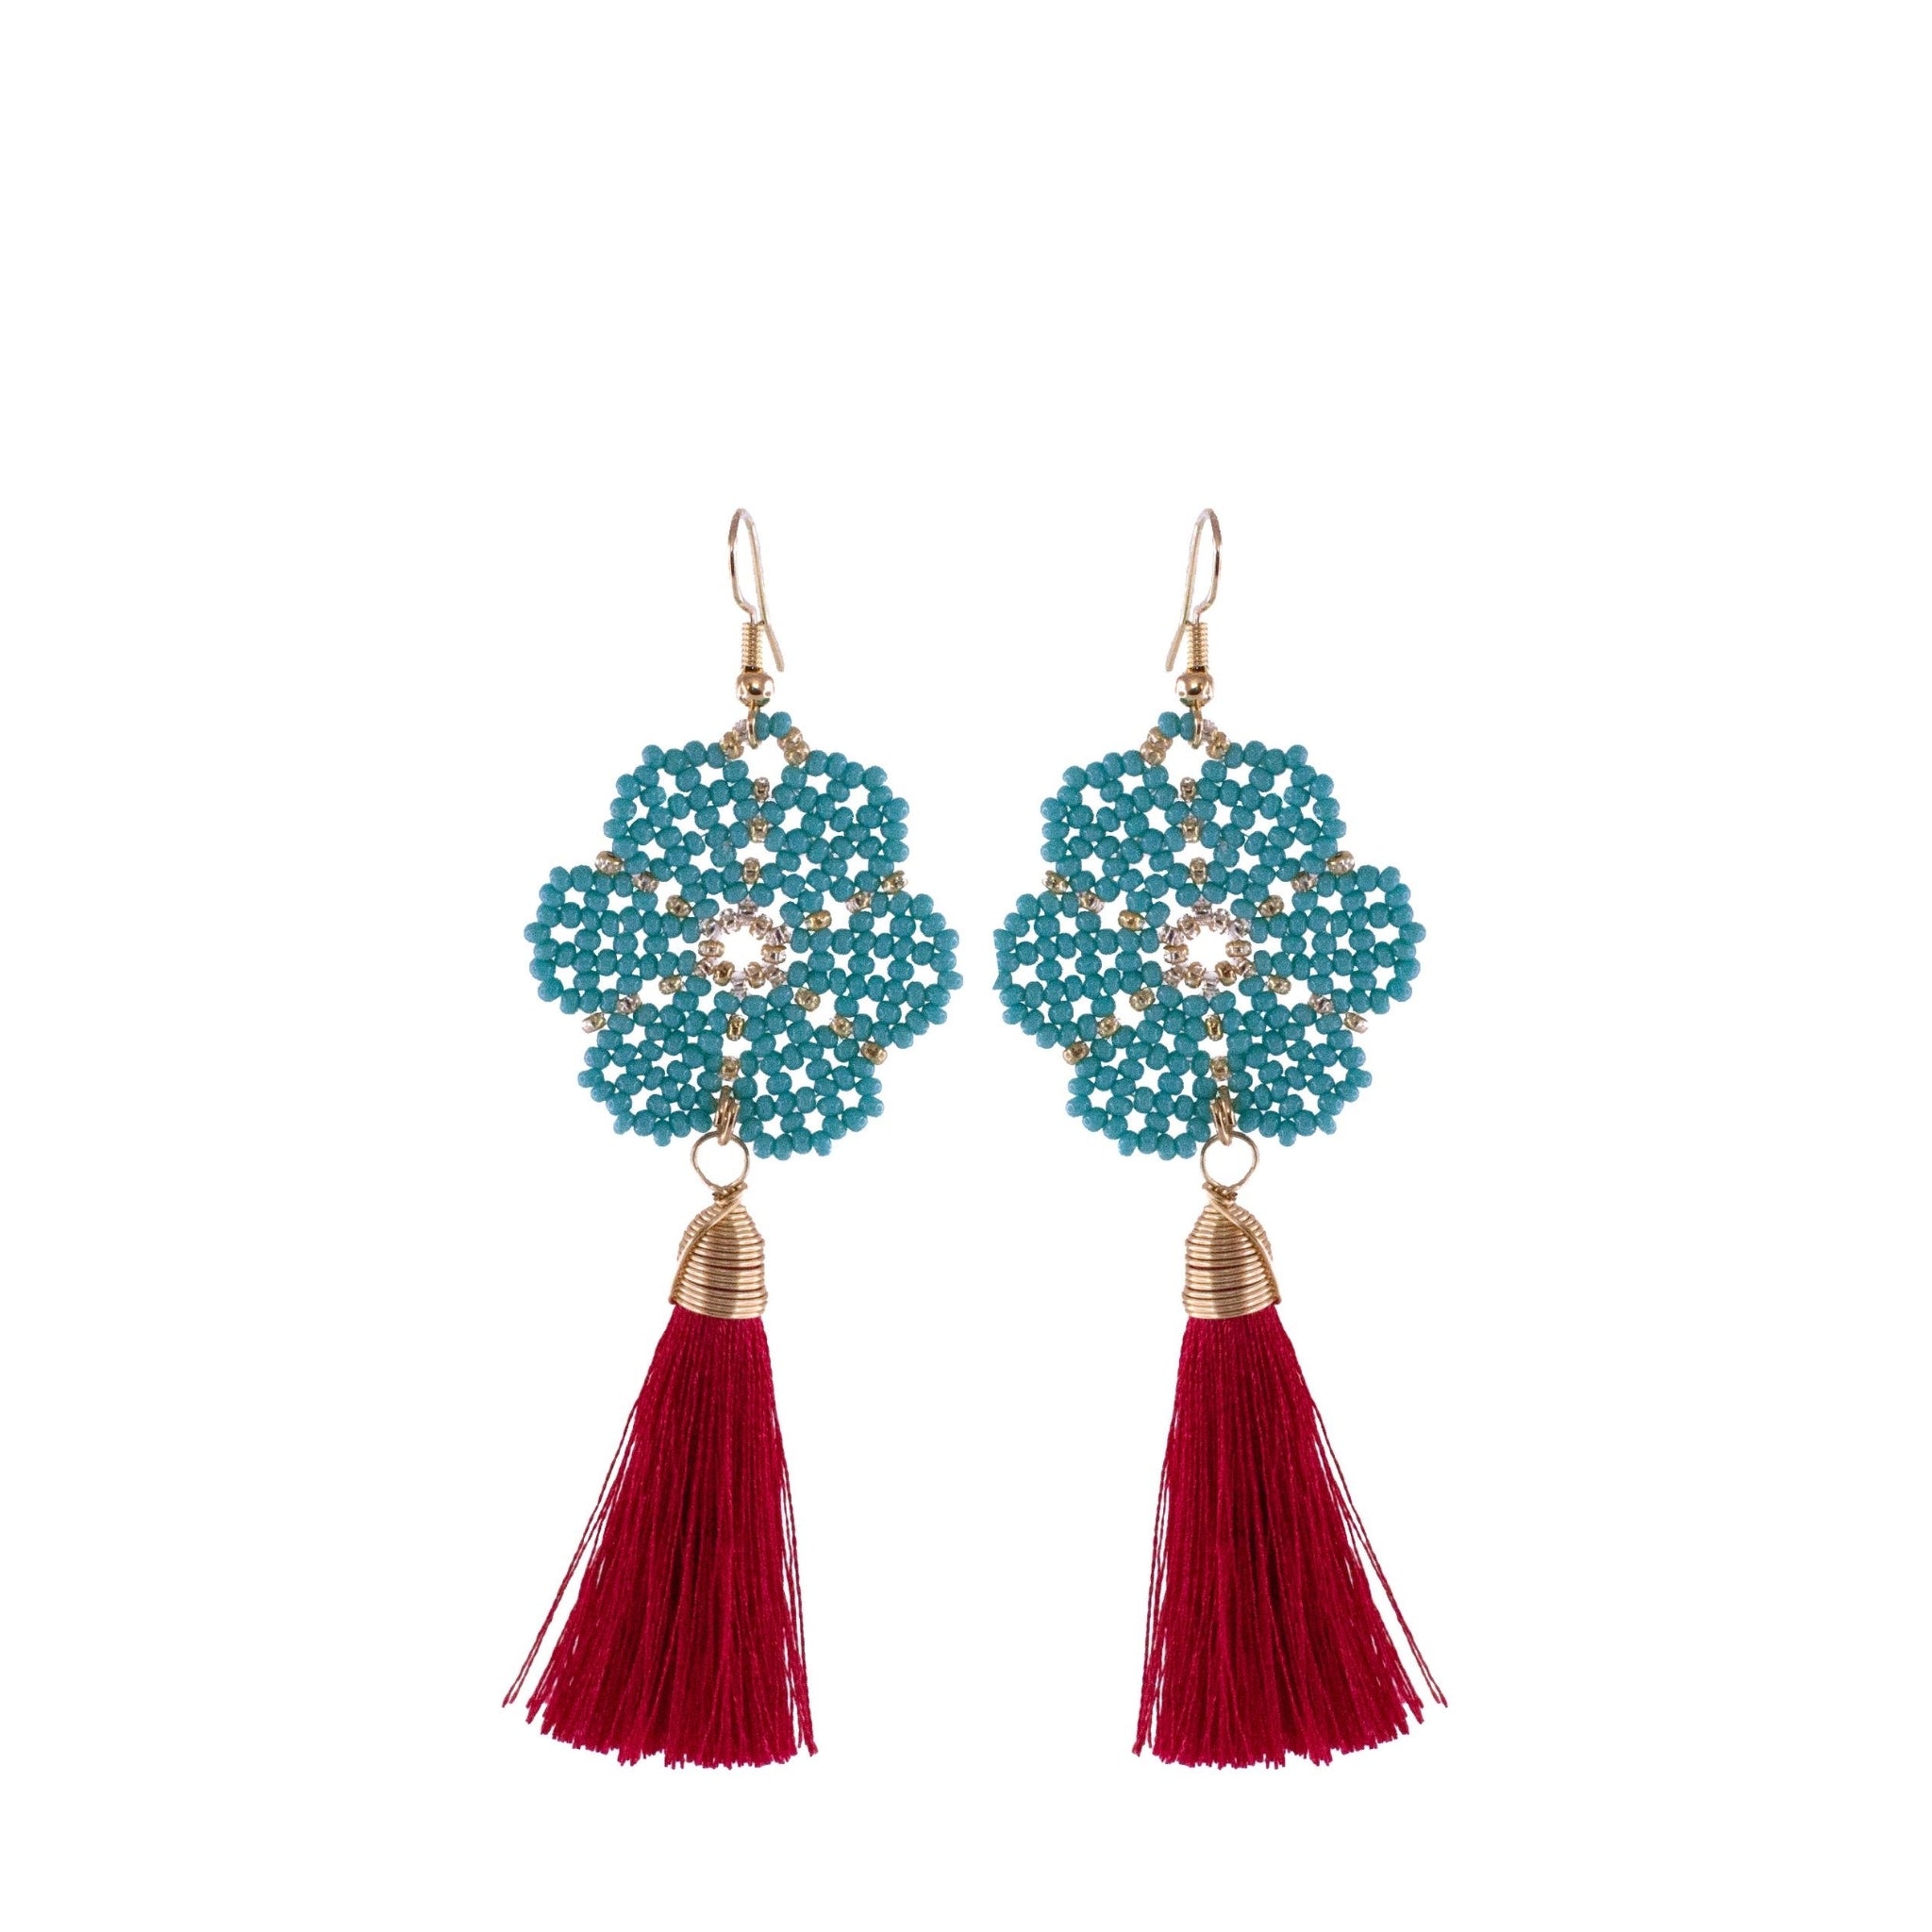 Huichol and Silk Earrings Teal and Red